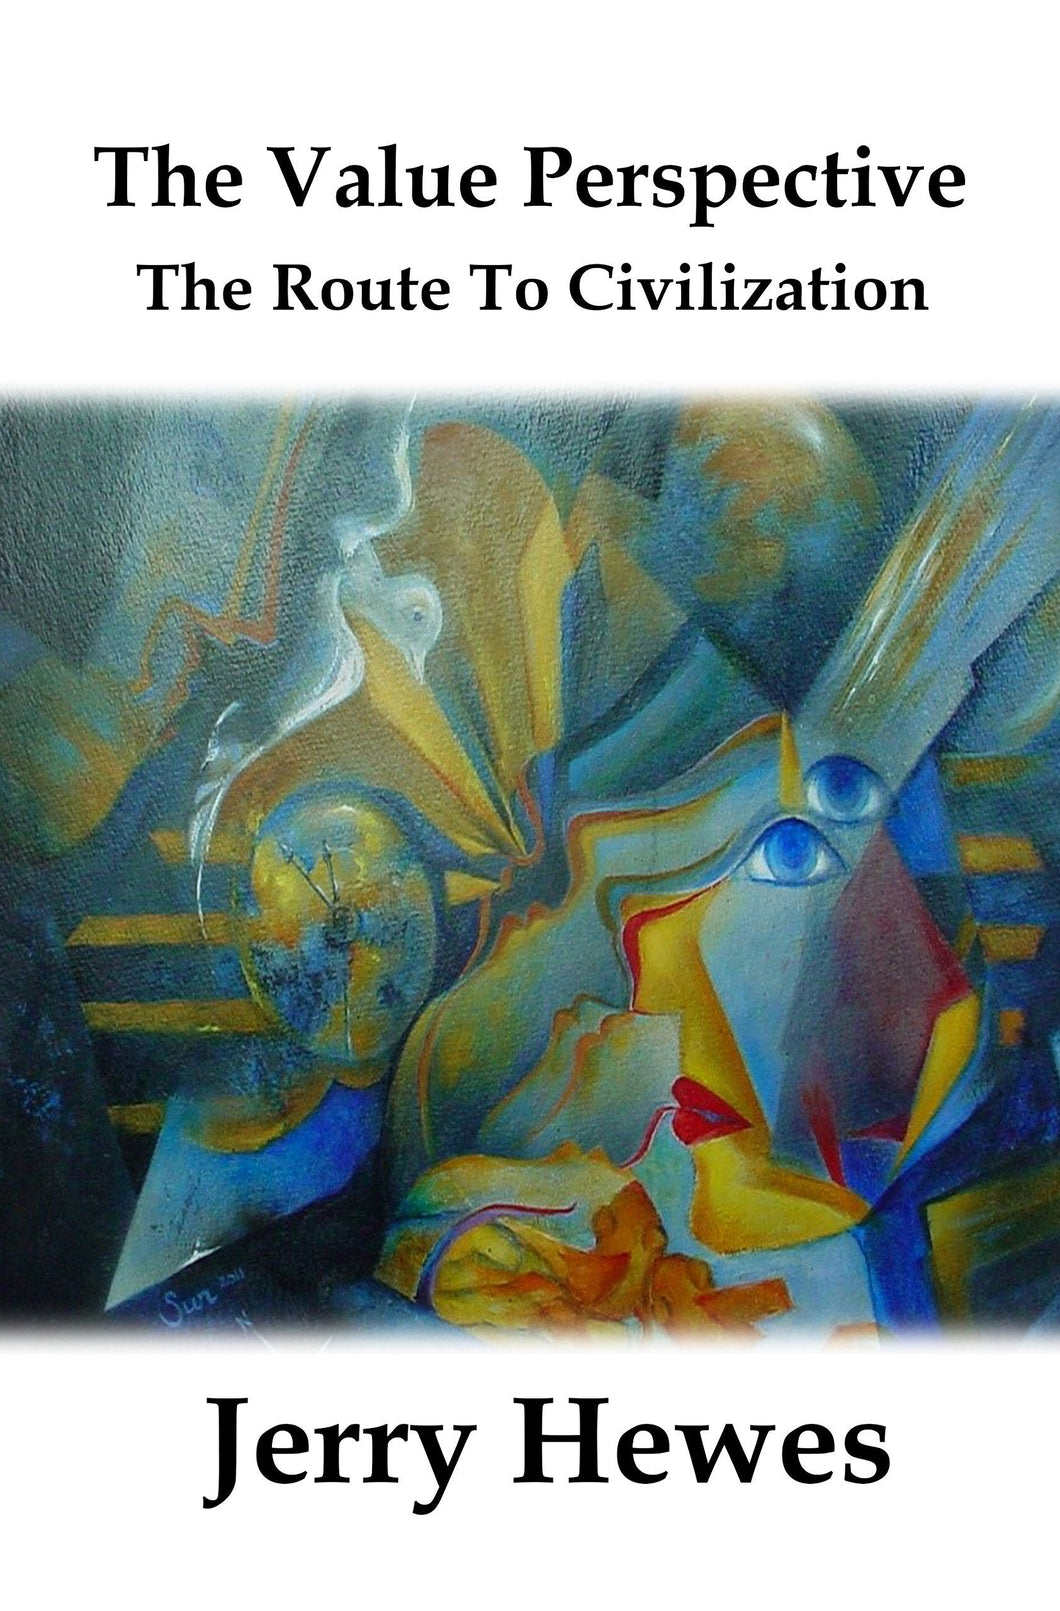 The Value Perspective: The Route to Civilization - Starry Night Publishing